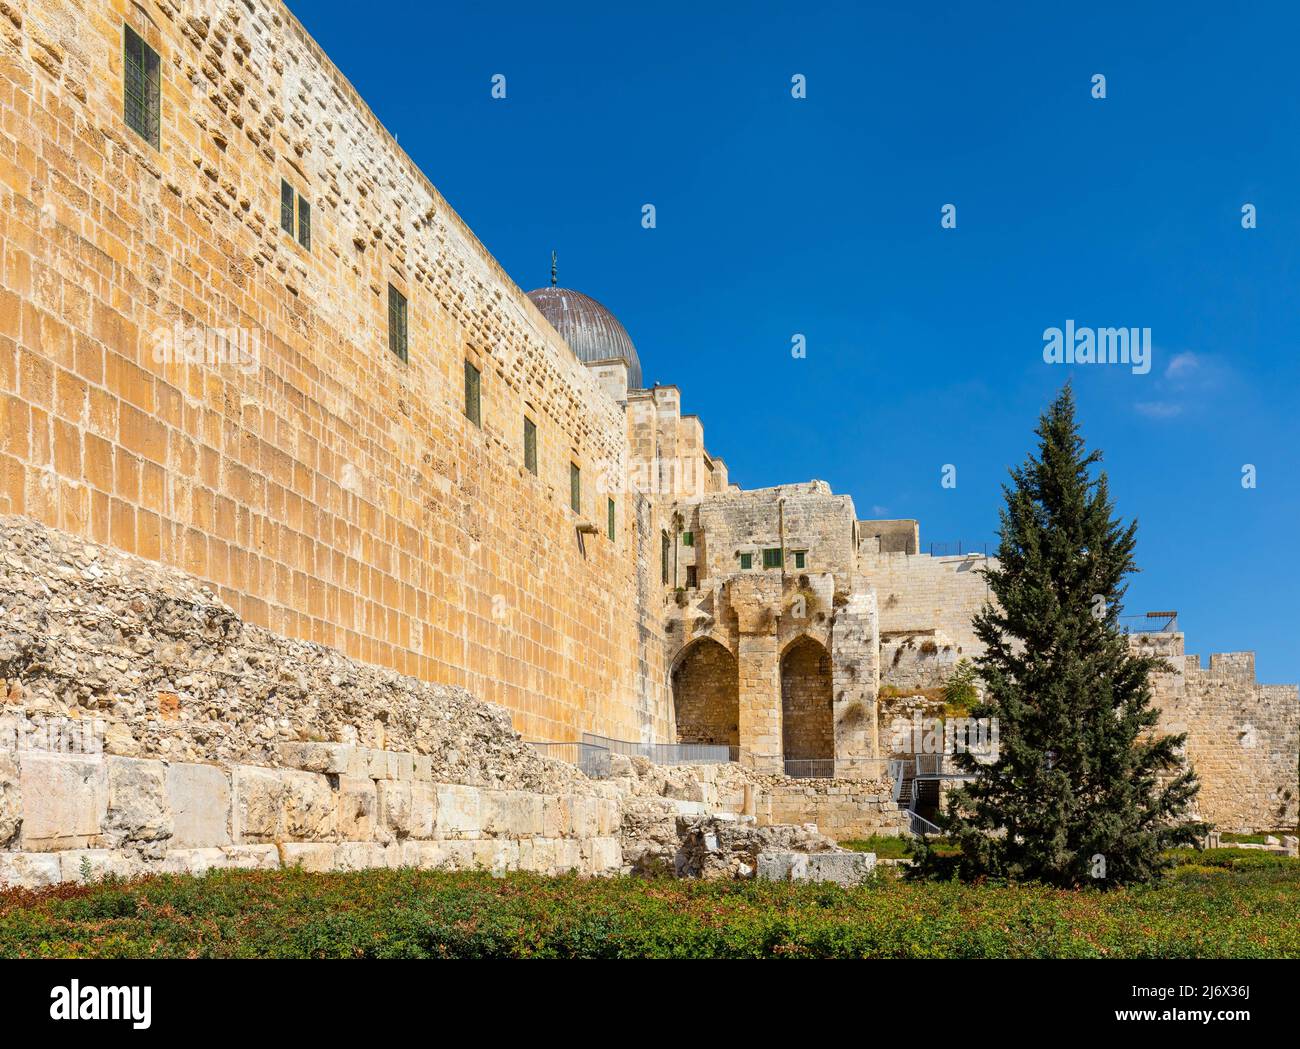 Jerusalem, Israel - October 13, 2017: Umayyad Palace Garden archeological park at south wall of Temple Mount and Al-Aqsa Mosque in Jerusalem Old City Stock Photo